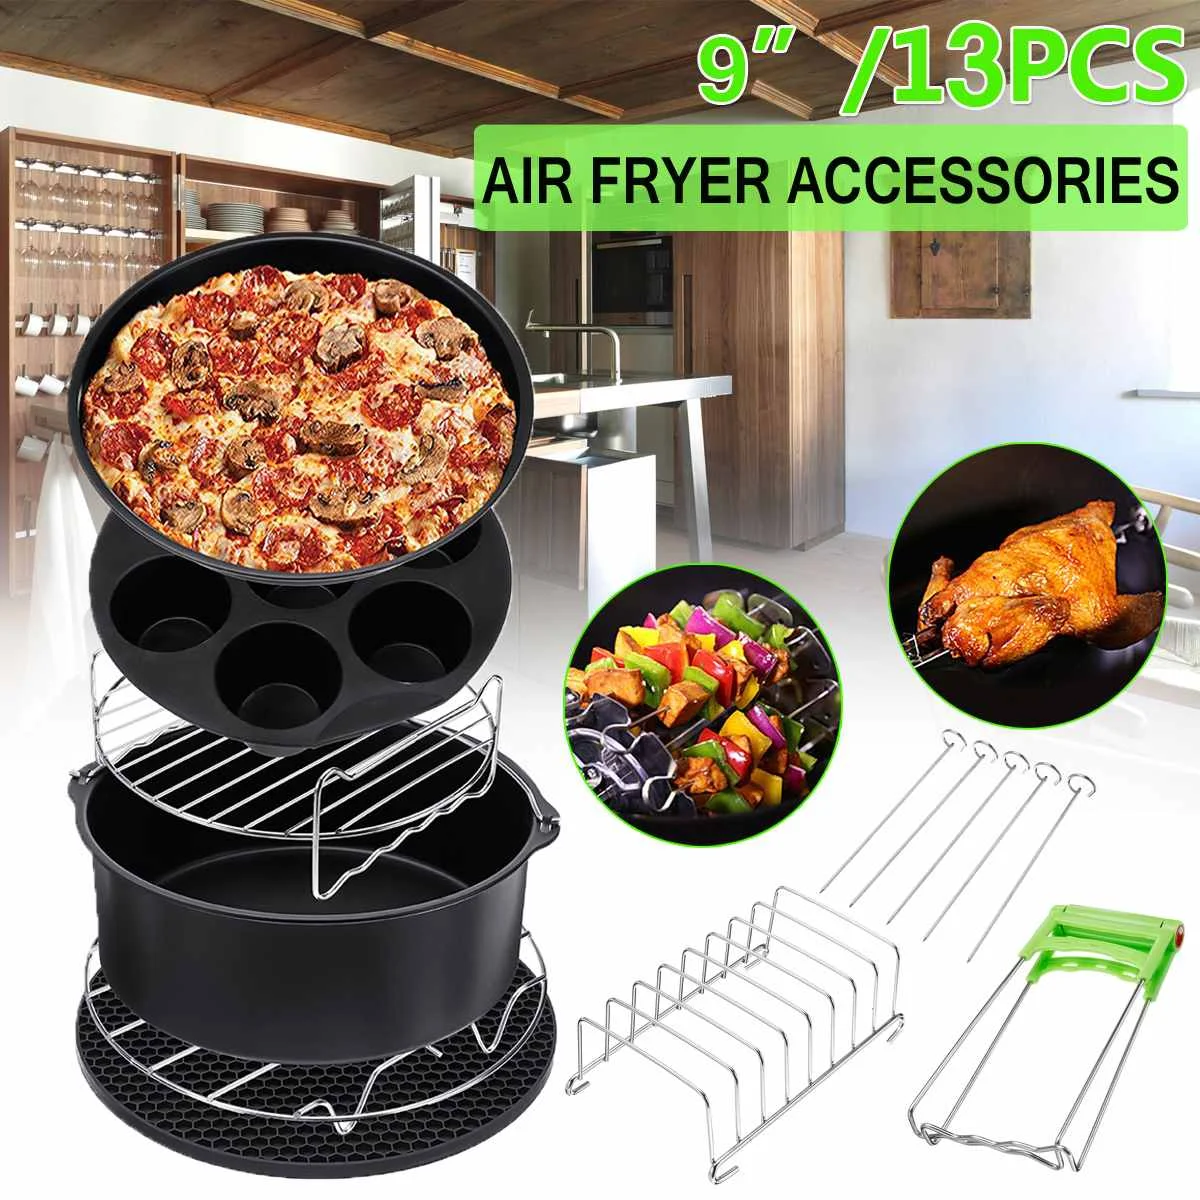 

13PCS Air Fryer Accessories 9 Inch Fit for Airfryer 5.2-6.8QT Baking Basket Pizza Plate Grill Pot Kitchen Cooking Tool Party